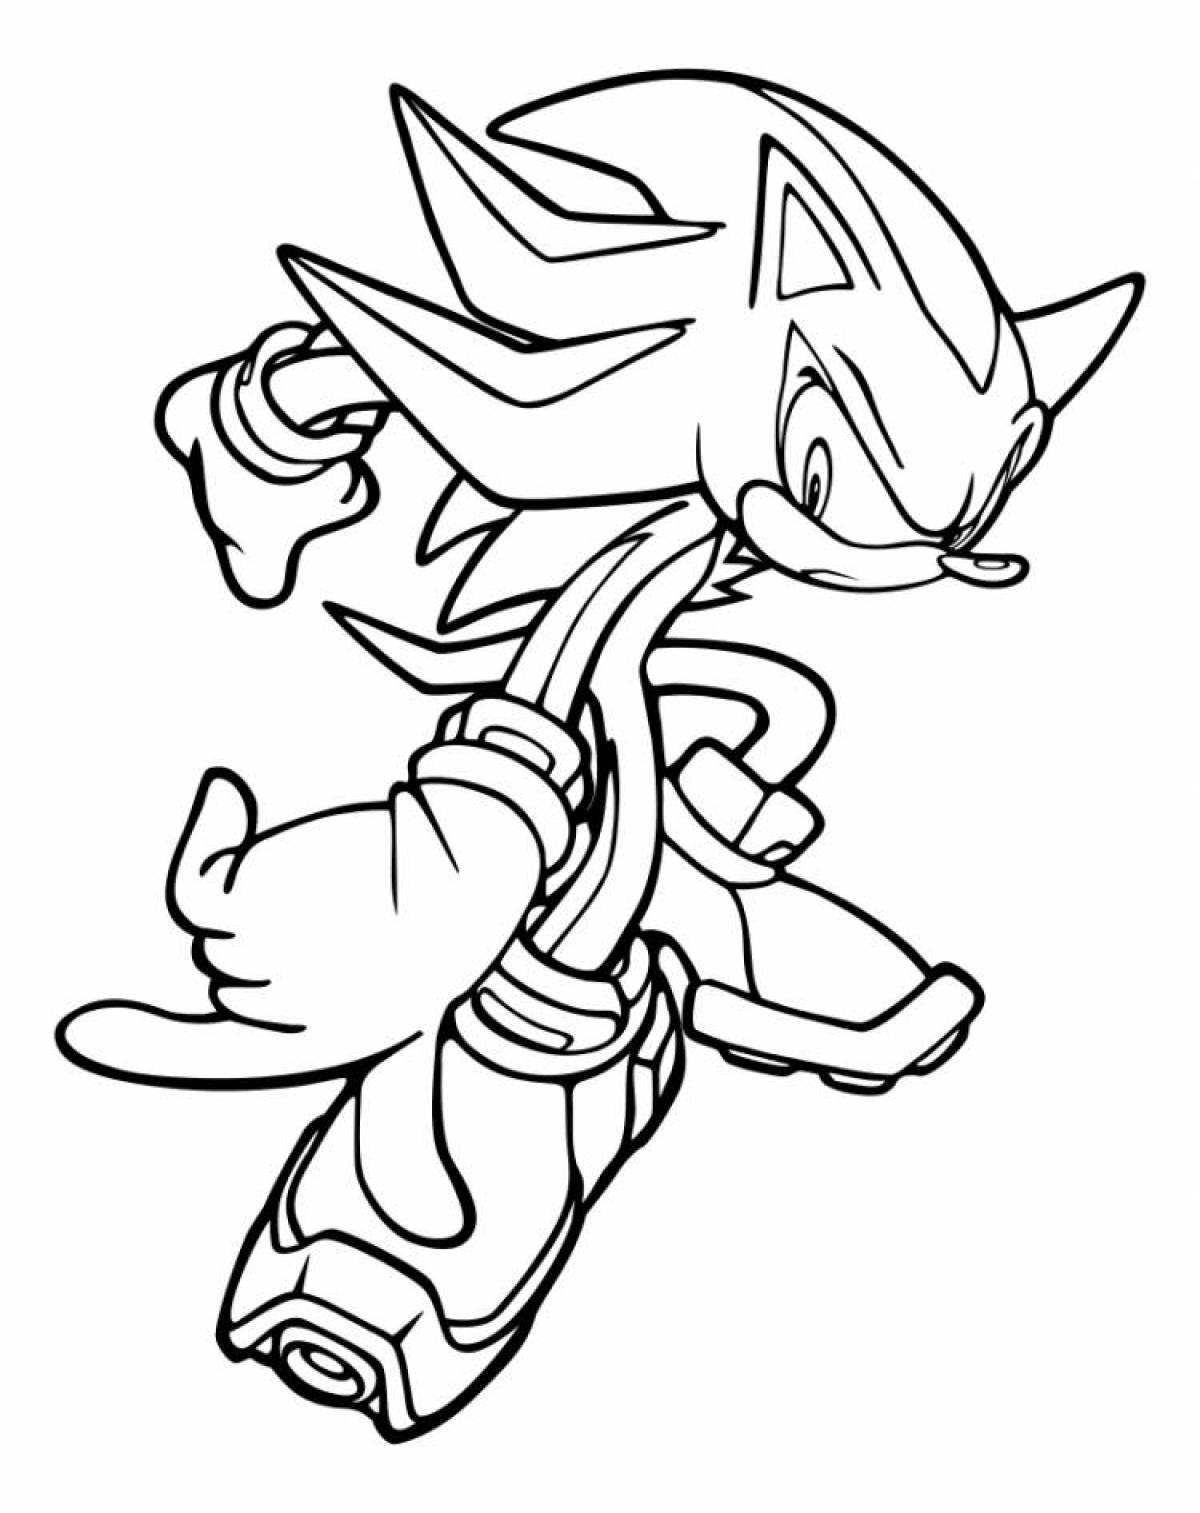 Dazzling sonic shadow coloring book